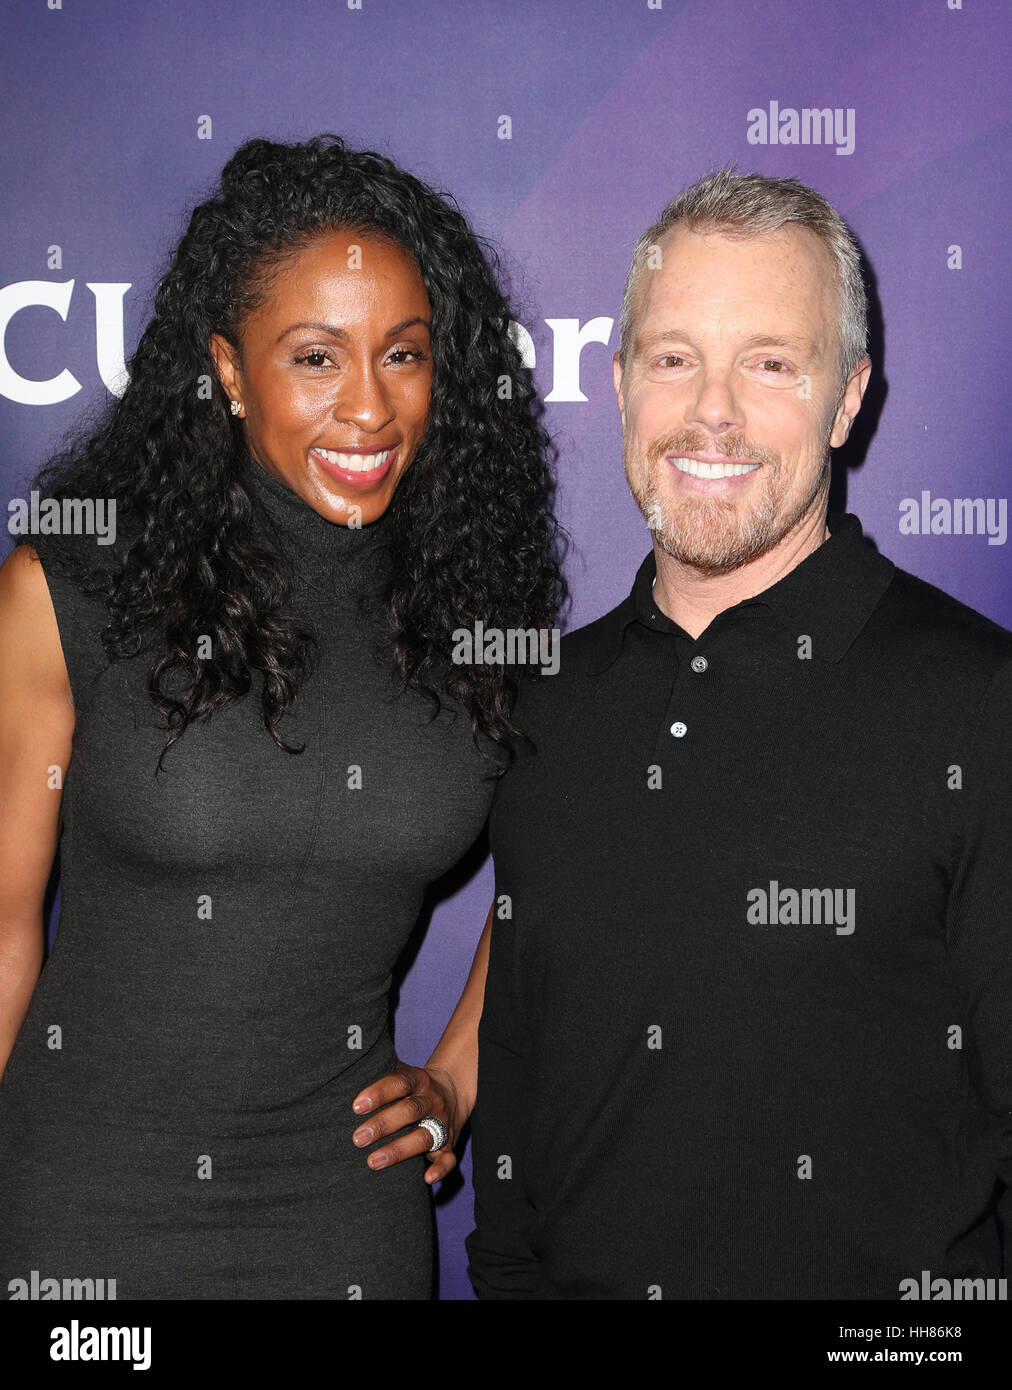 Pasadena, California, USA. 17th Jan, 2017. Gunnar Peterson, Latreal Mitchell, at 2017 NBCUniversal Winter Press Tour - Day 1, at Langham Hotel In California on January 17, 2017. Credit: MediaPunch Inc/Alamy Live News Stock Photo